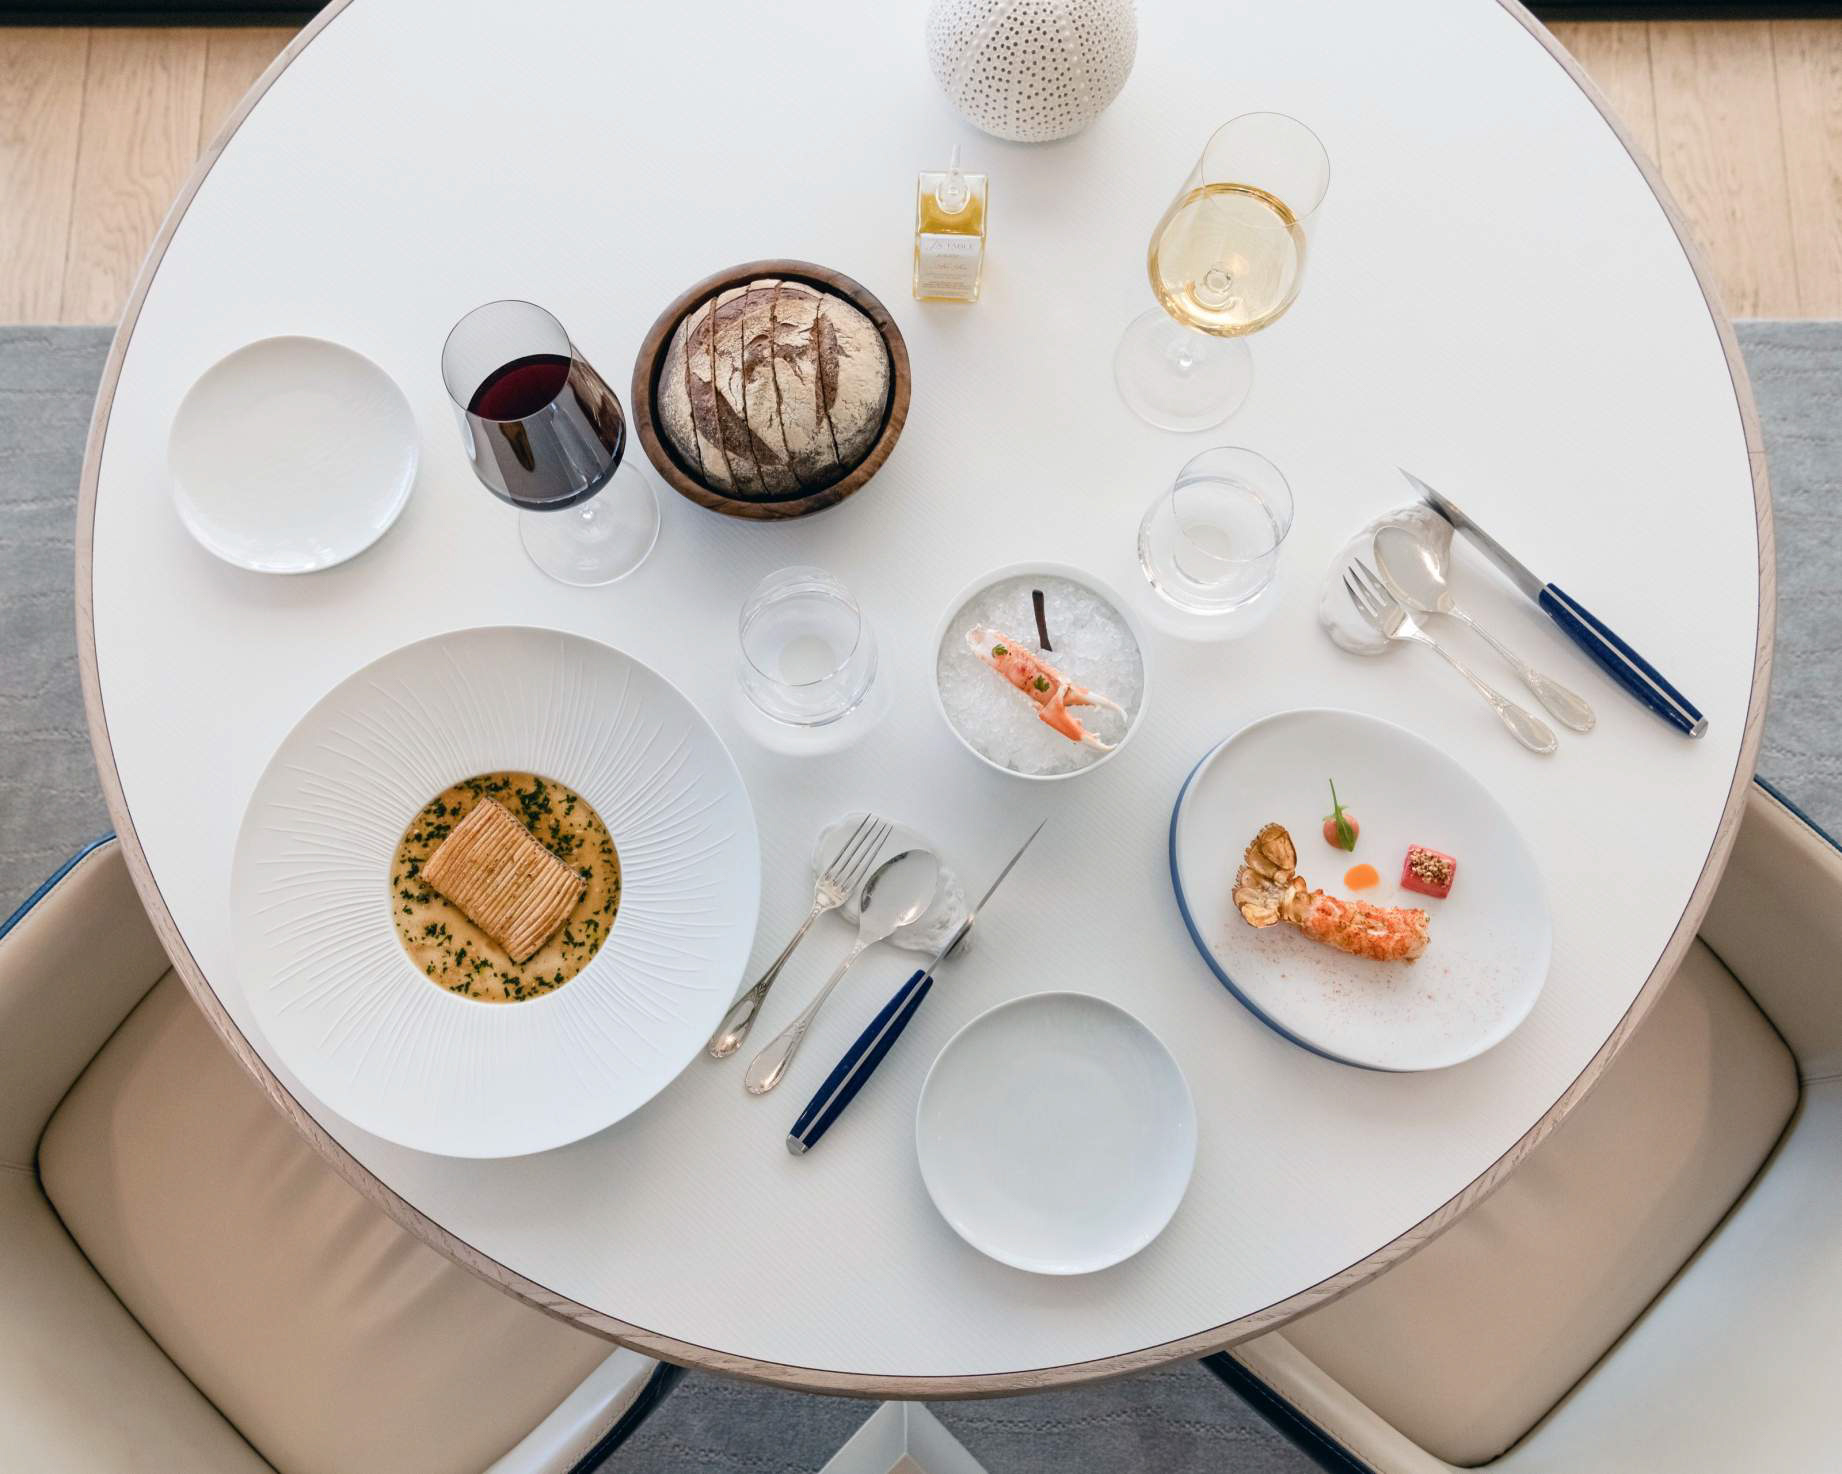 One of France’s new three star restaurants is La Table du Castellet in south of France.&nbsp;